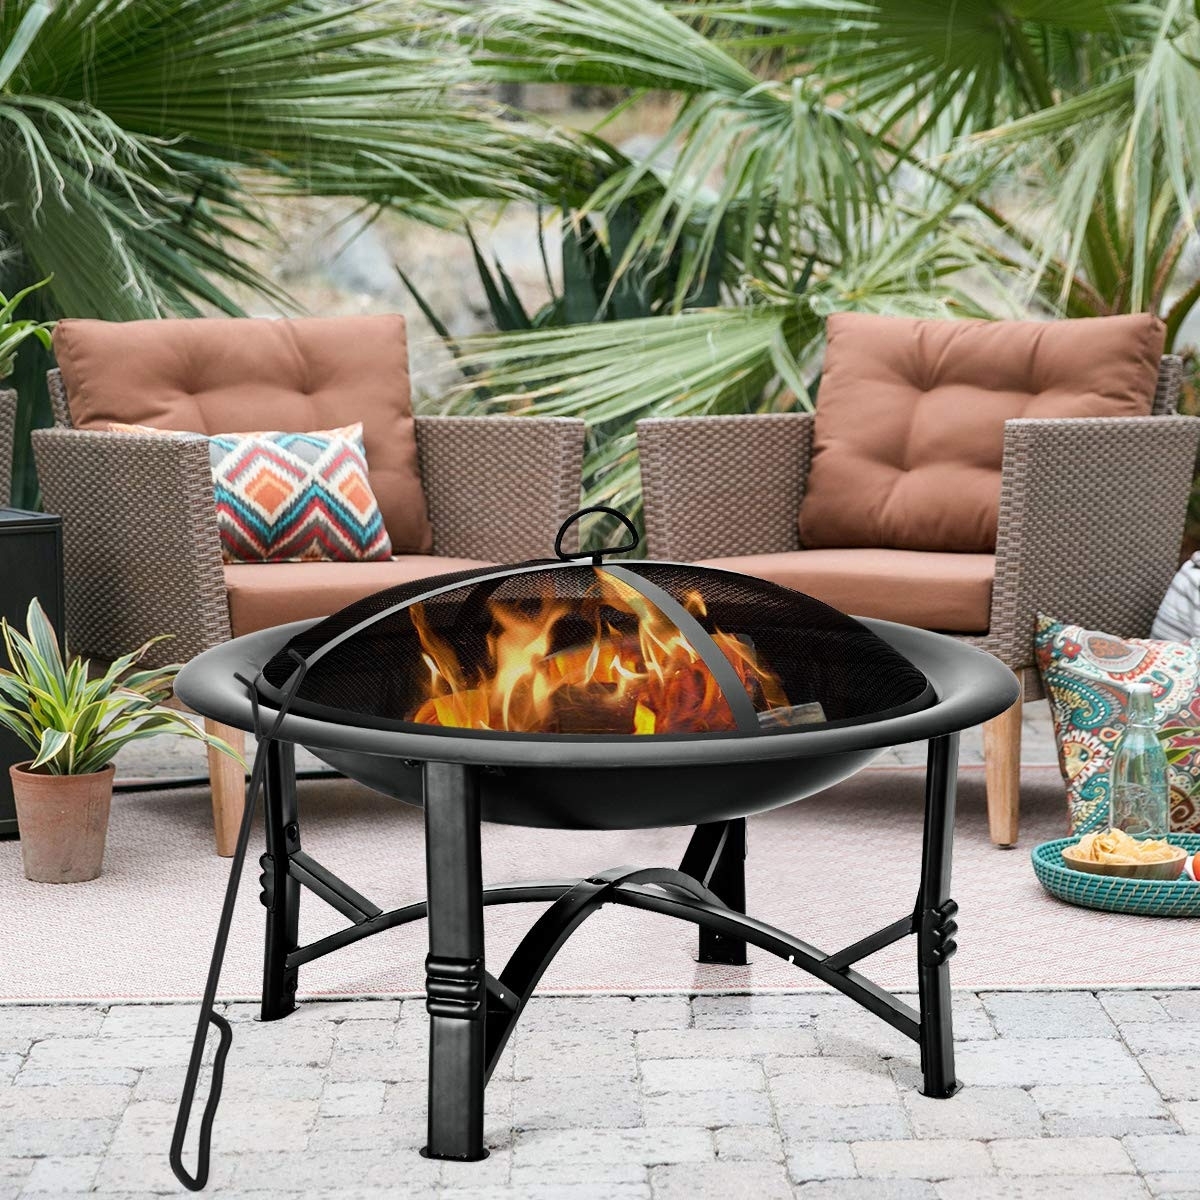 30 In. Outdoor Fire Pit BBQ Portable Patio Garden Grill